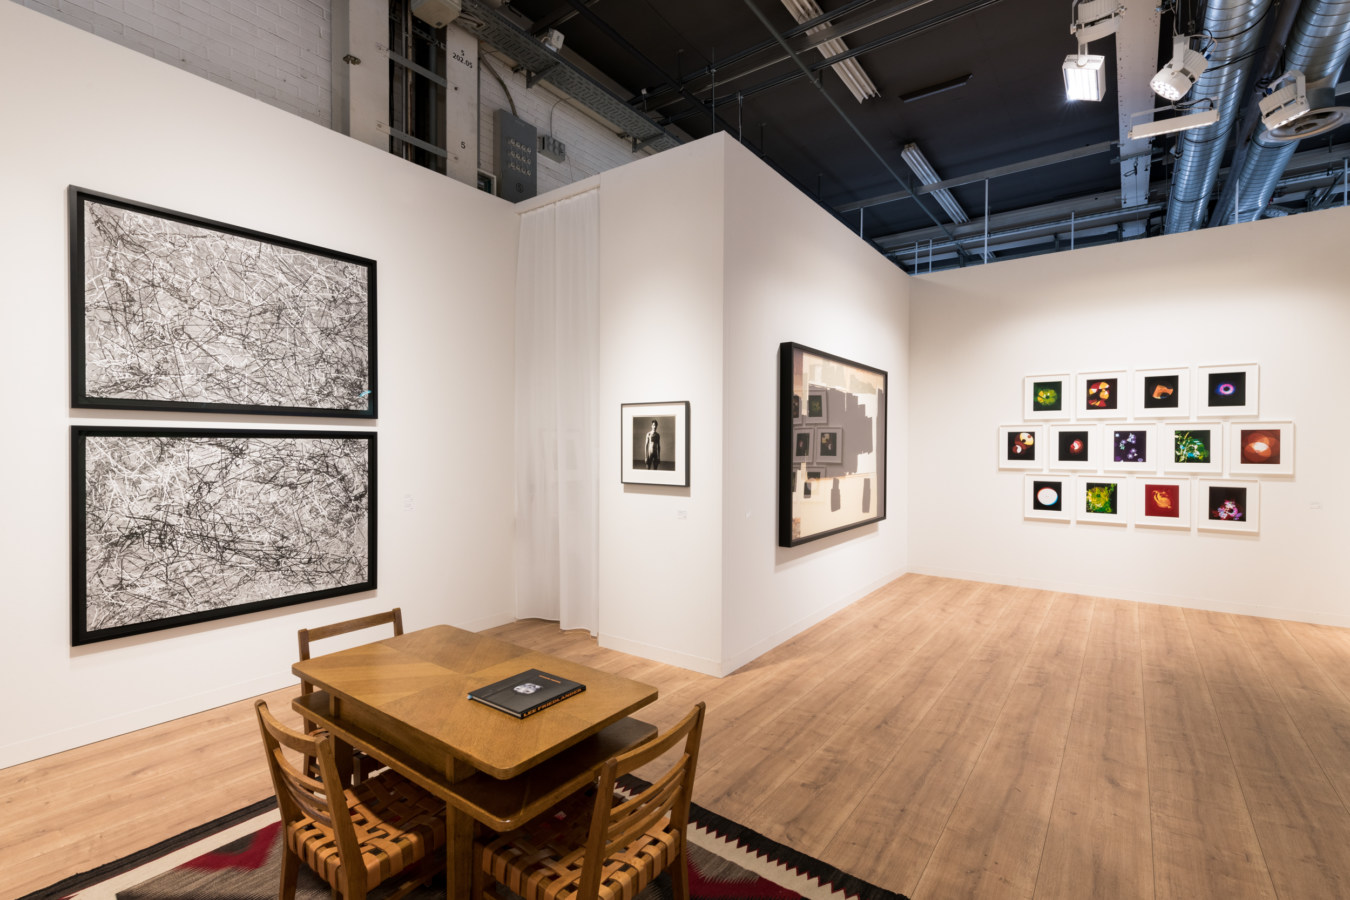 Installation view of artwork on display in an art fair booth